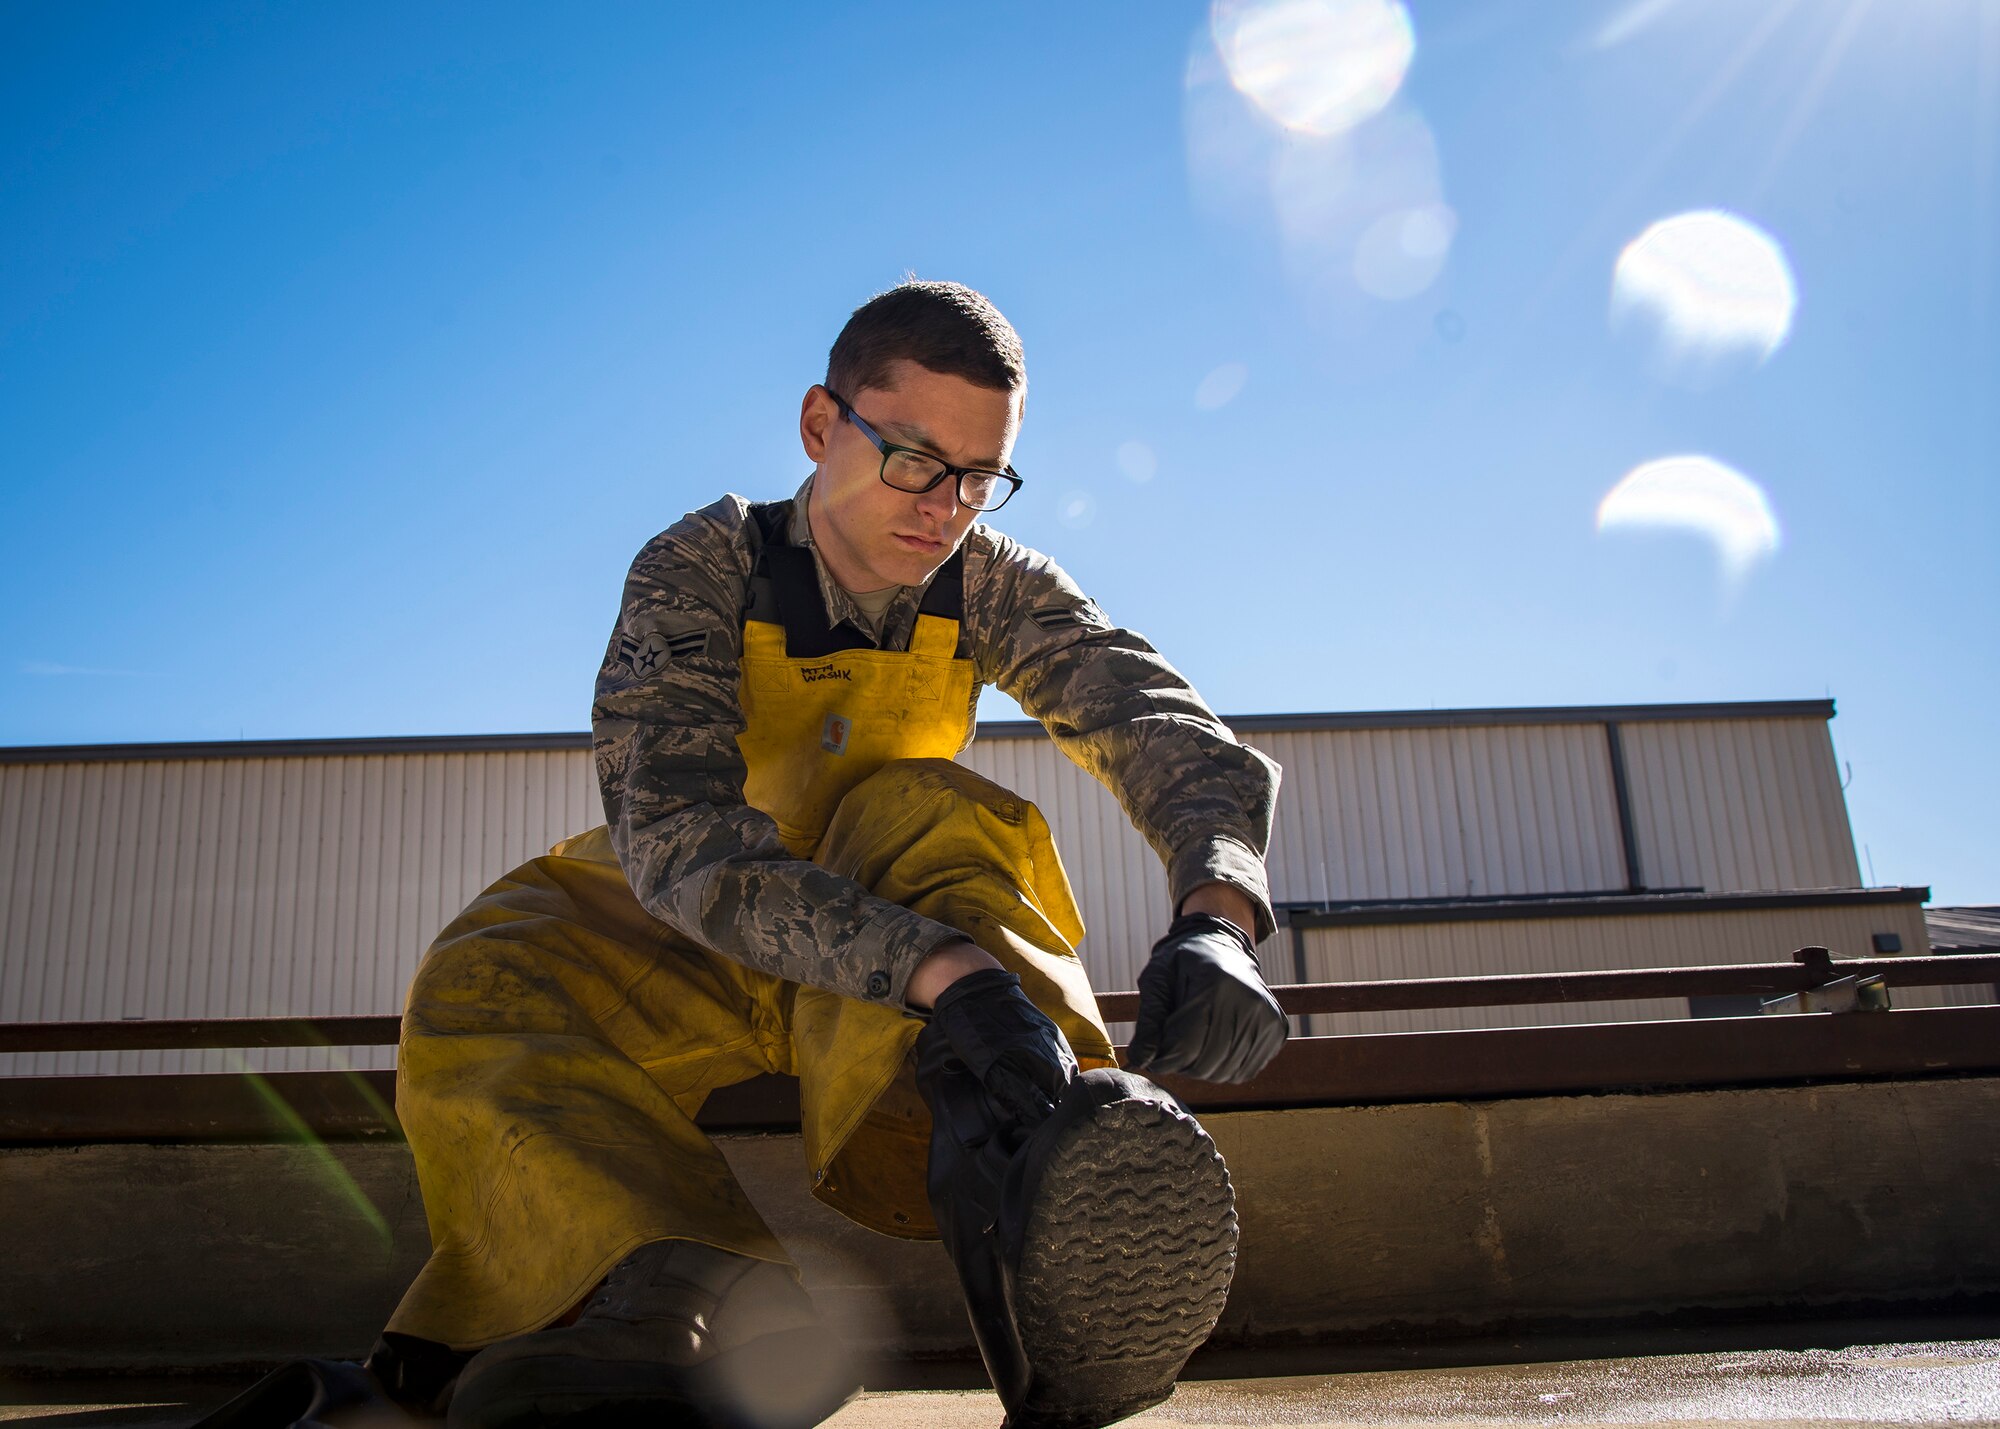 Airman 1st Class Alec Whitacre, 74th Aircraft Maintenance Unit munitions specialist, puts on his personal protective equipment prior to an A-10C Thunderbolt II wash, Feb. 25, 2019, at Moody Air Force Base, Ga. To guarantee Moody’s fleet of 49 A-10s are in peak warfighting condition, Airmen from the 23d Maintenance Group dedicated over 10 hours washing the A-10 to ensure their aircraft is free of any surface or structural deficiencies that could present a safety hazard during flight. (U.S. Air Force photo by Airman 1st Class Eugene Oliver)